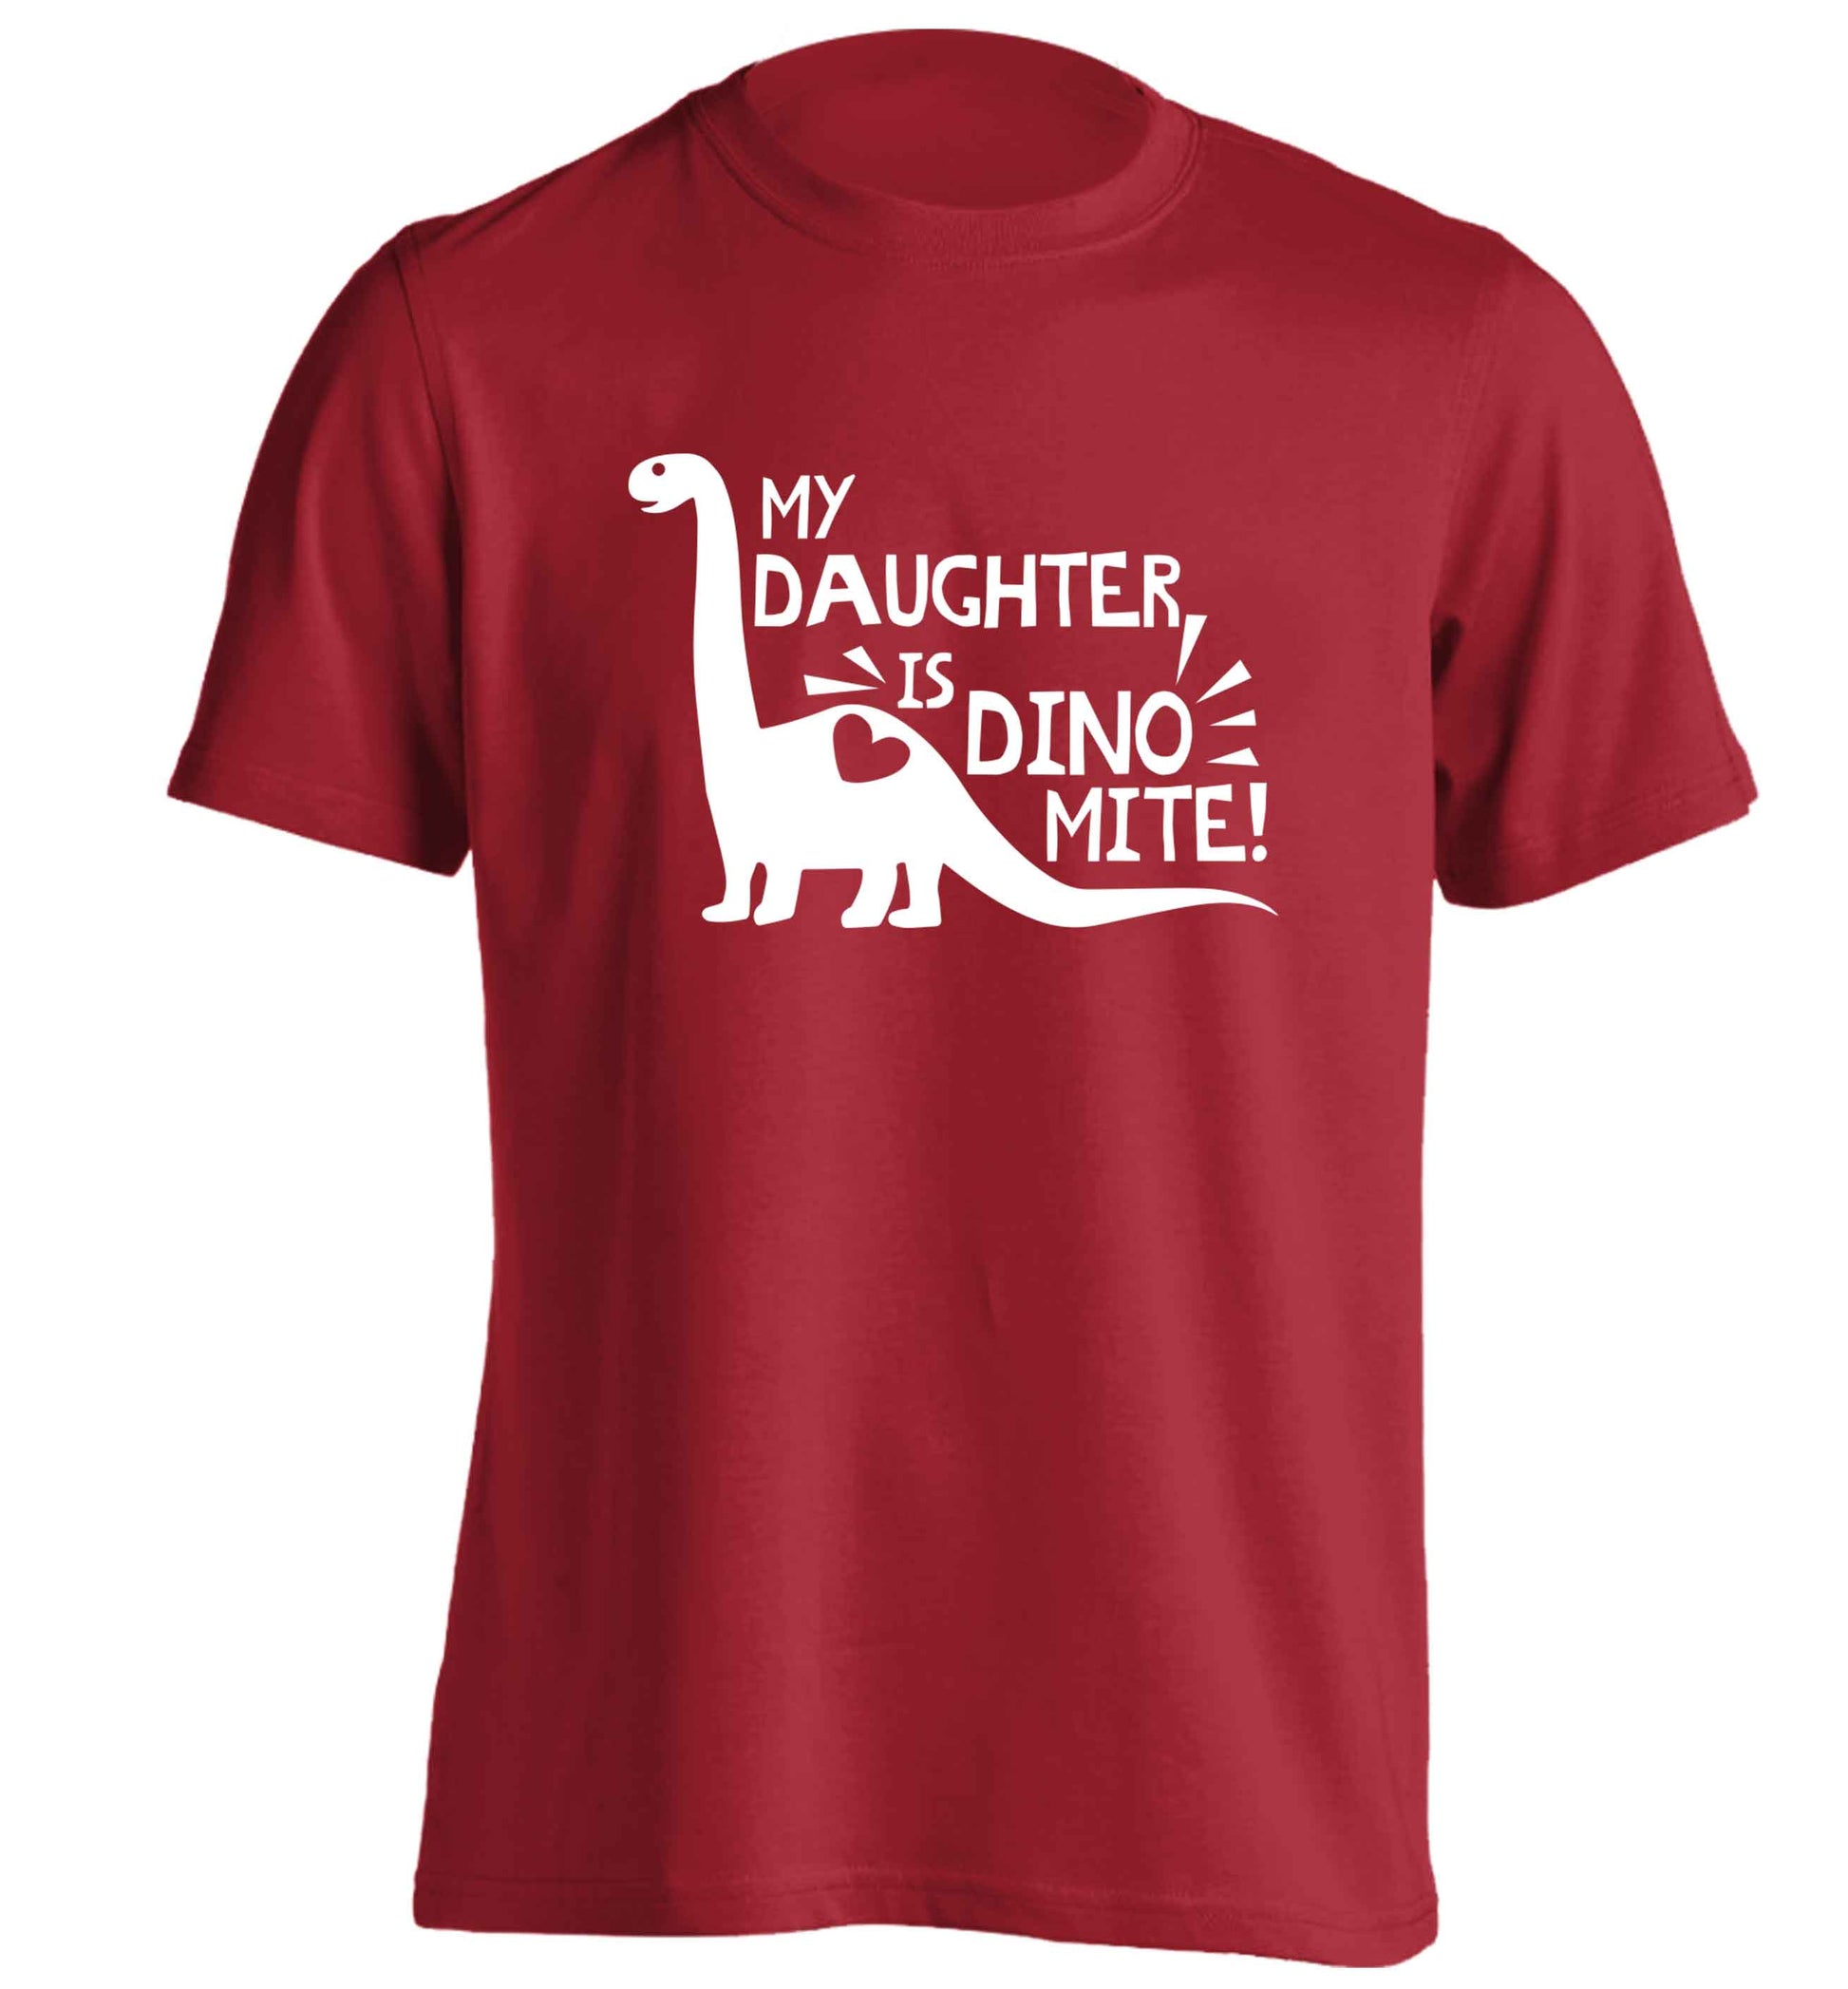 My daughter is dinomite! adults unisex red Tshirt 2XL